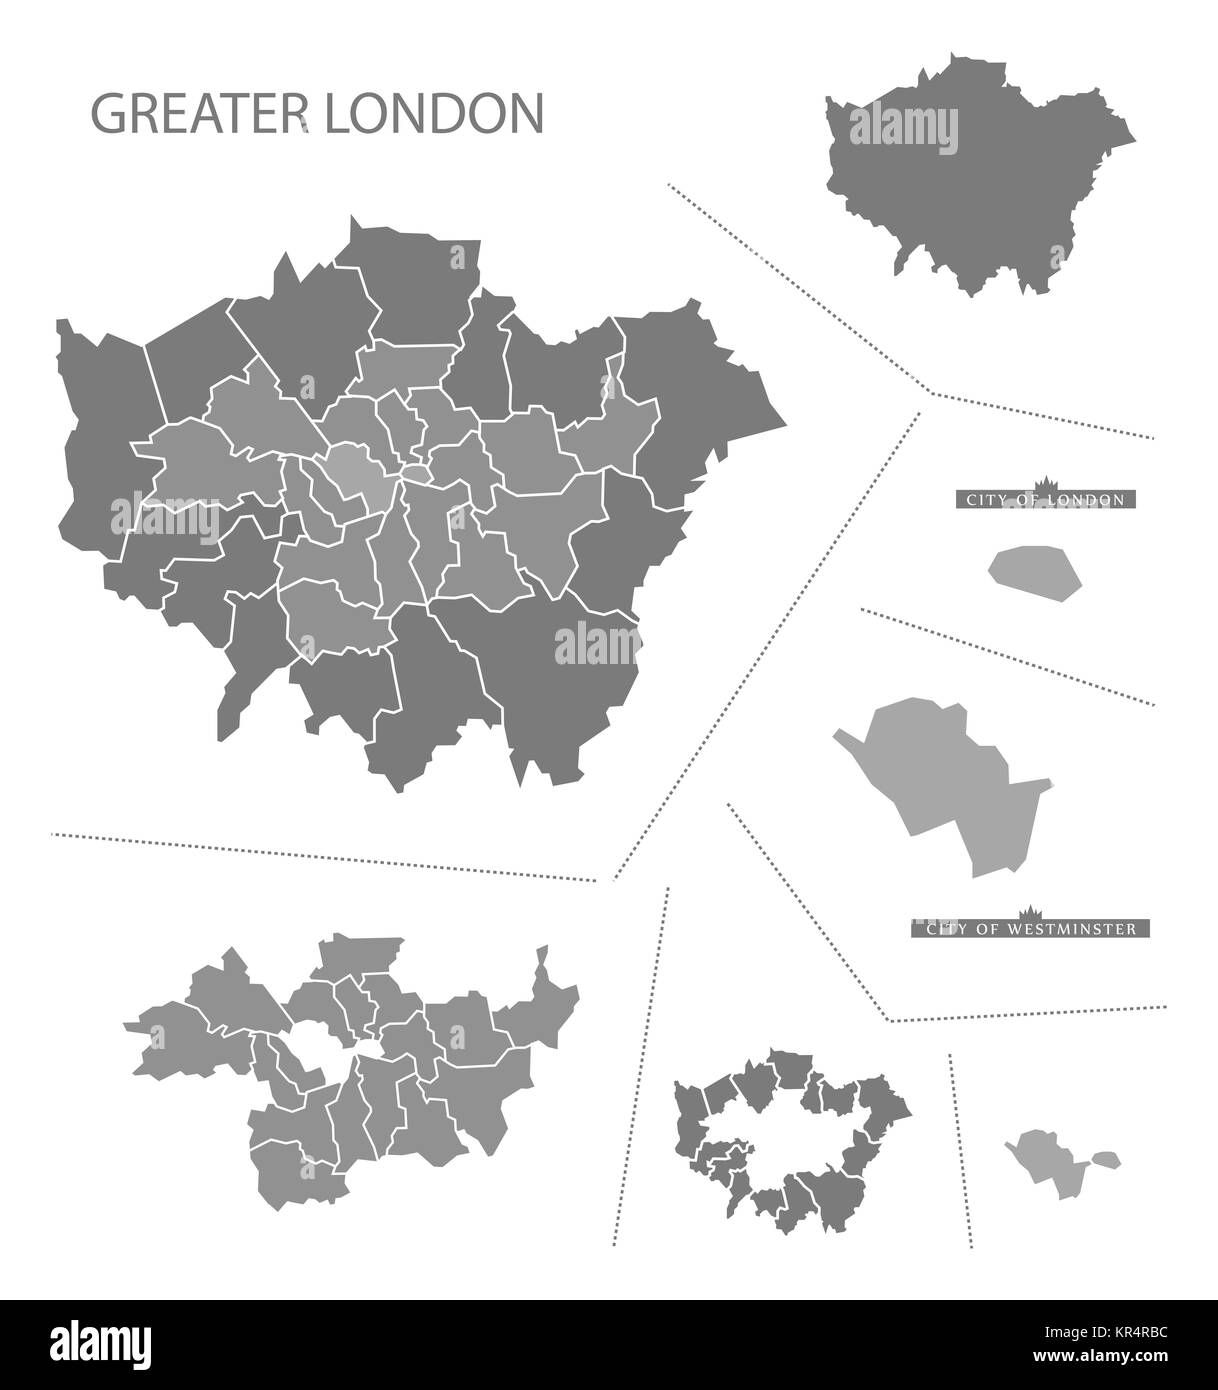 Greater London England Map grey Stock Photo